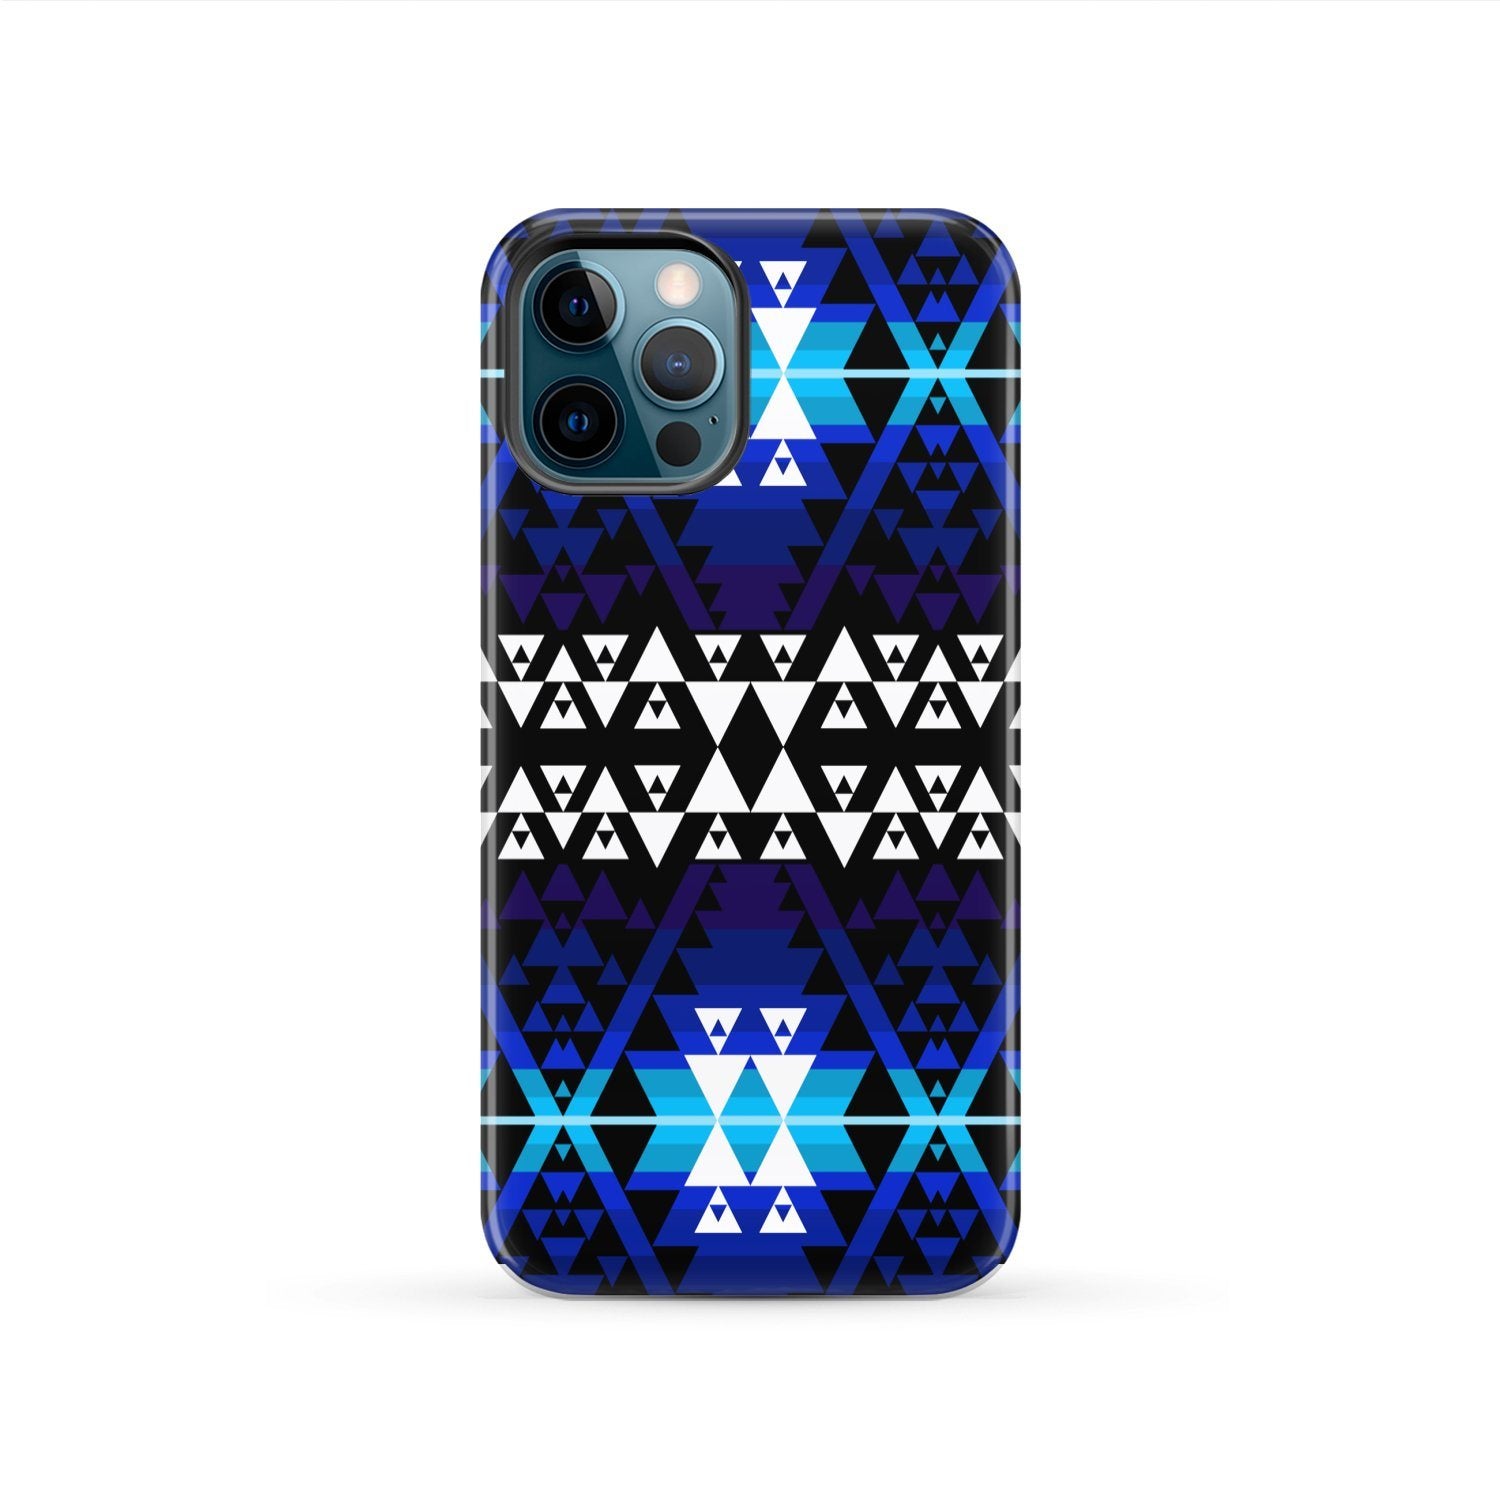 Writing on Stone Night Watch Tough Case Tough Case wc-fulfillment iPhone 12 Pro 